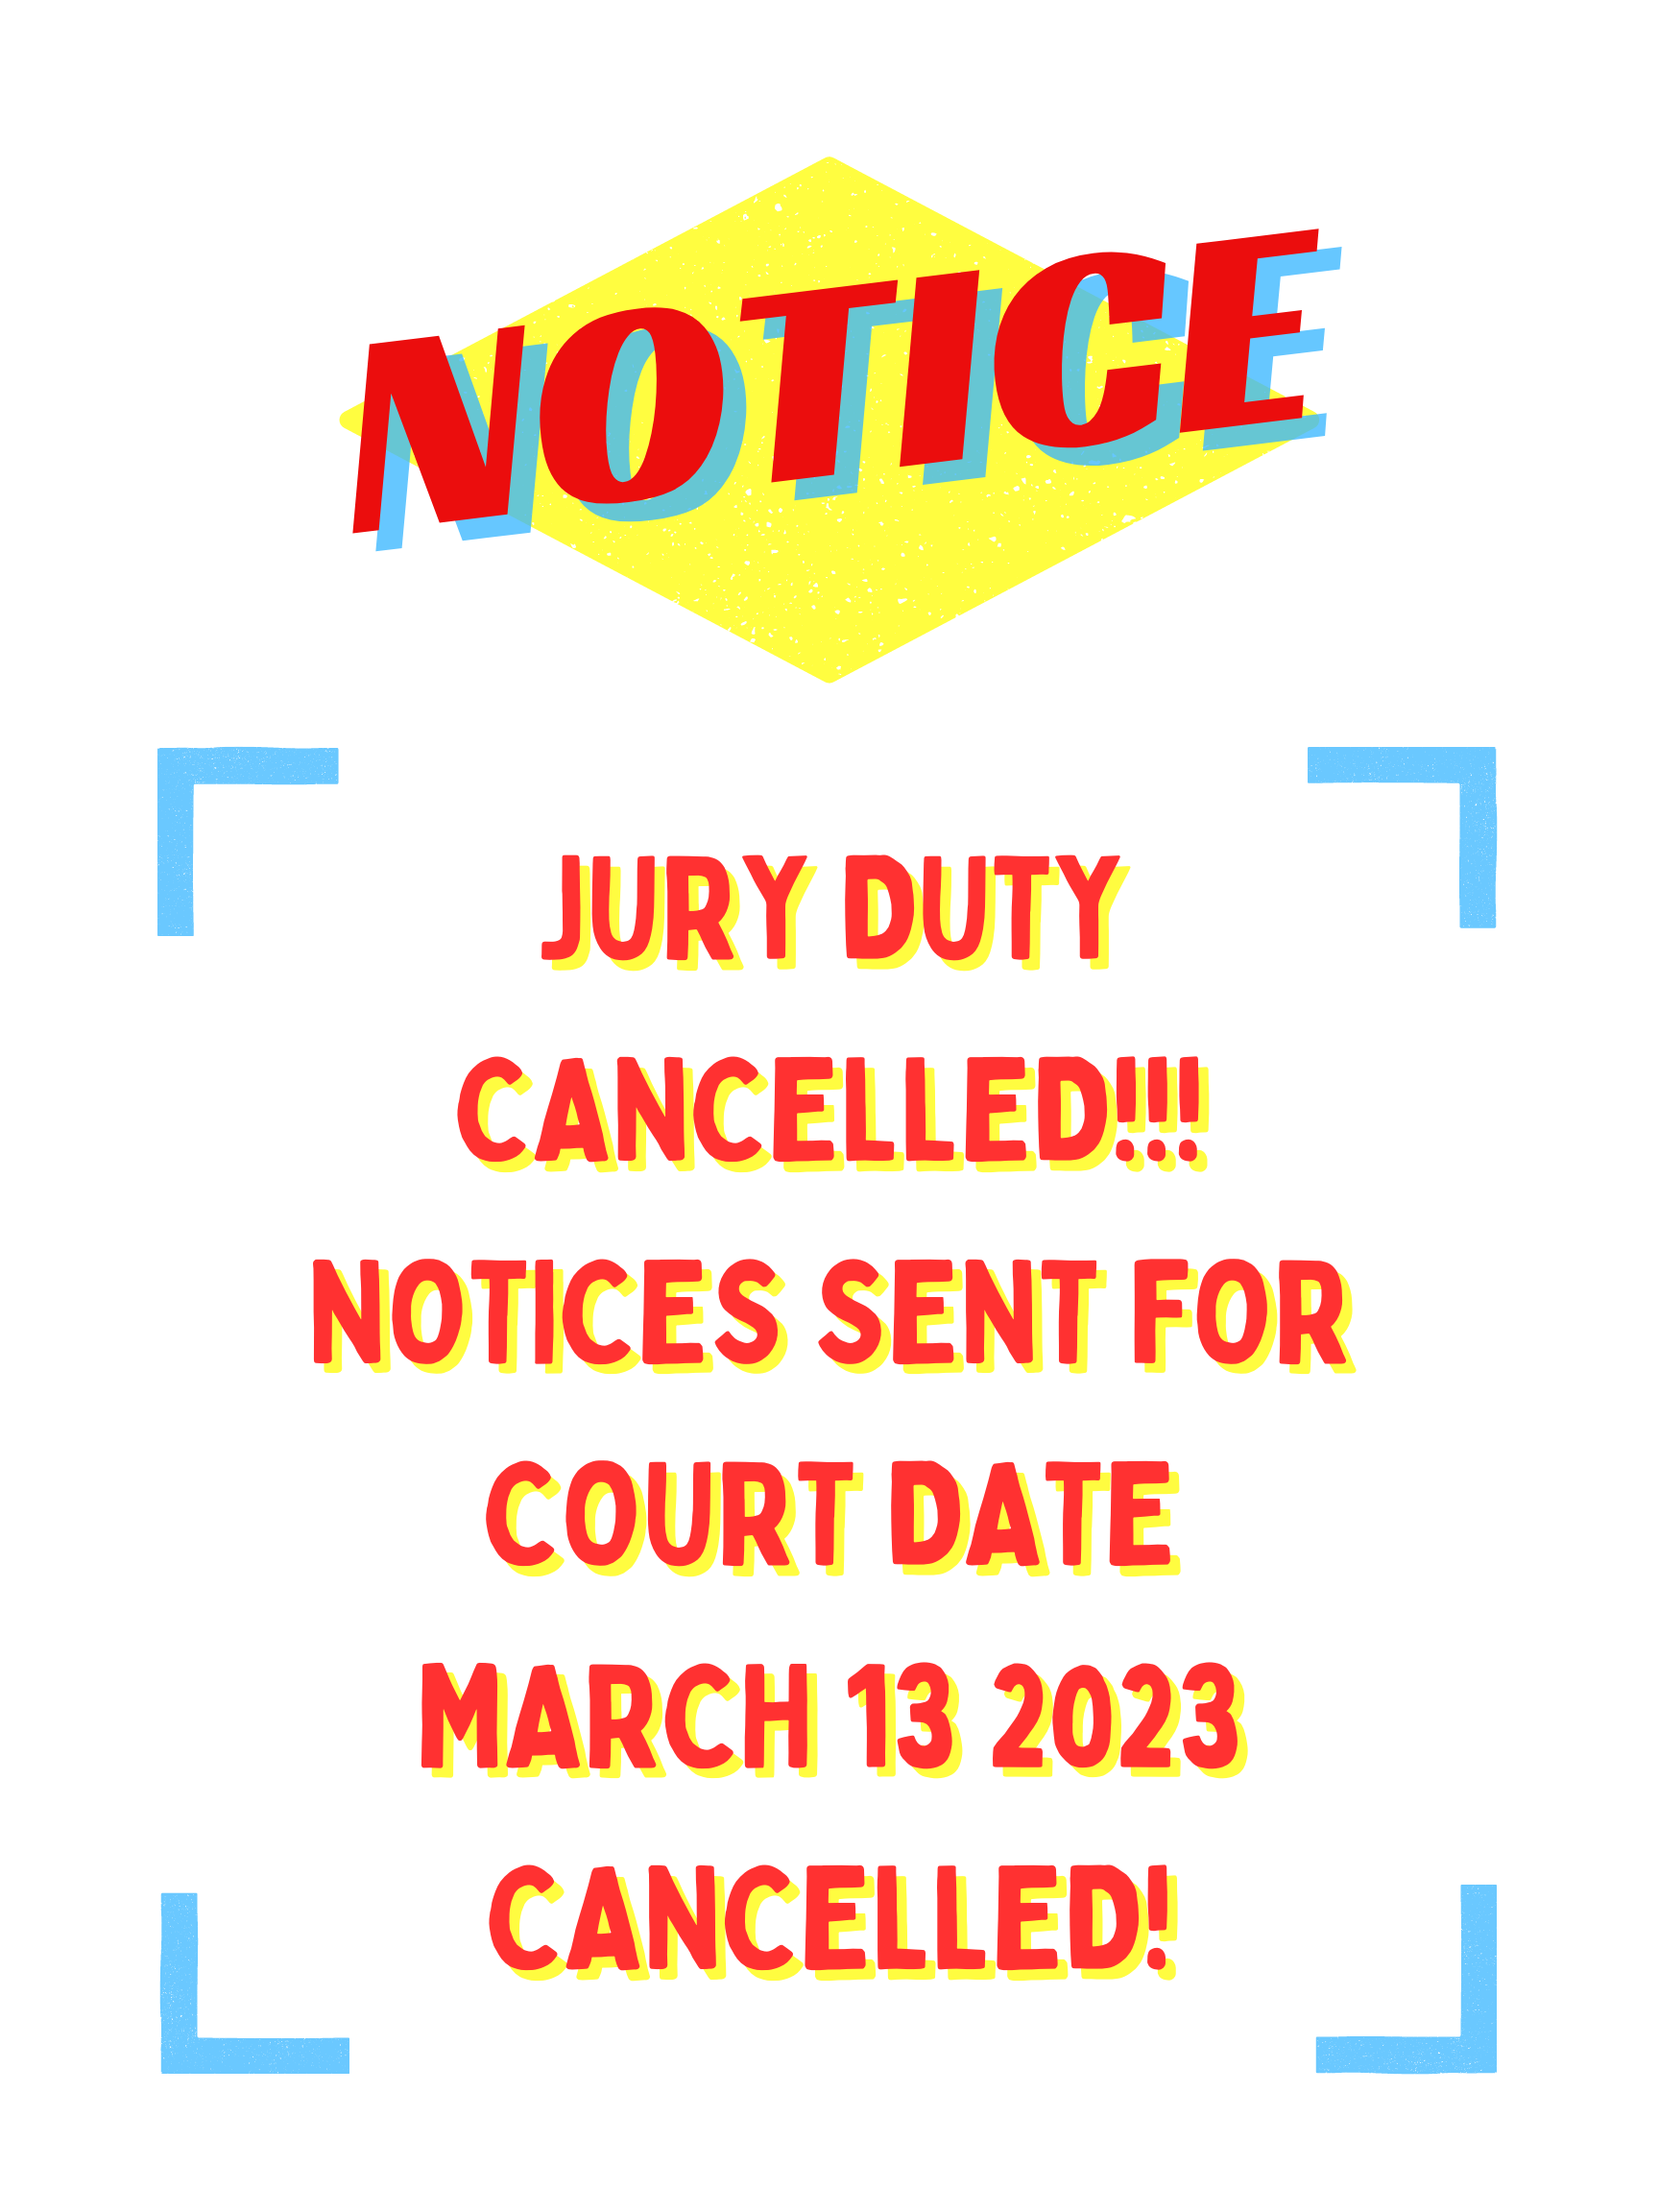 NOTICE OF CANCELLATION FOR JURY DUTY MARCH 13 2023